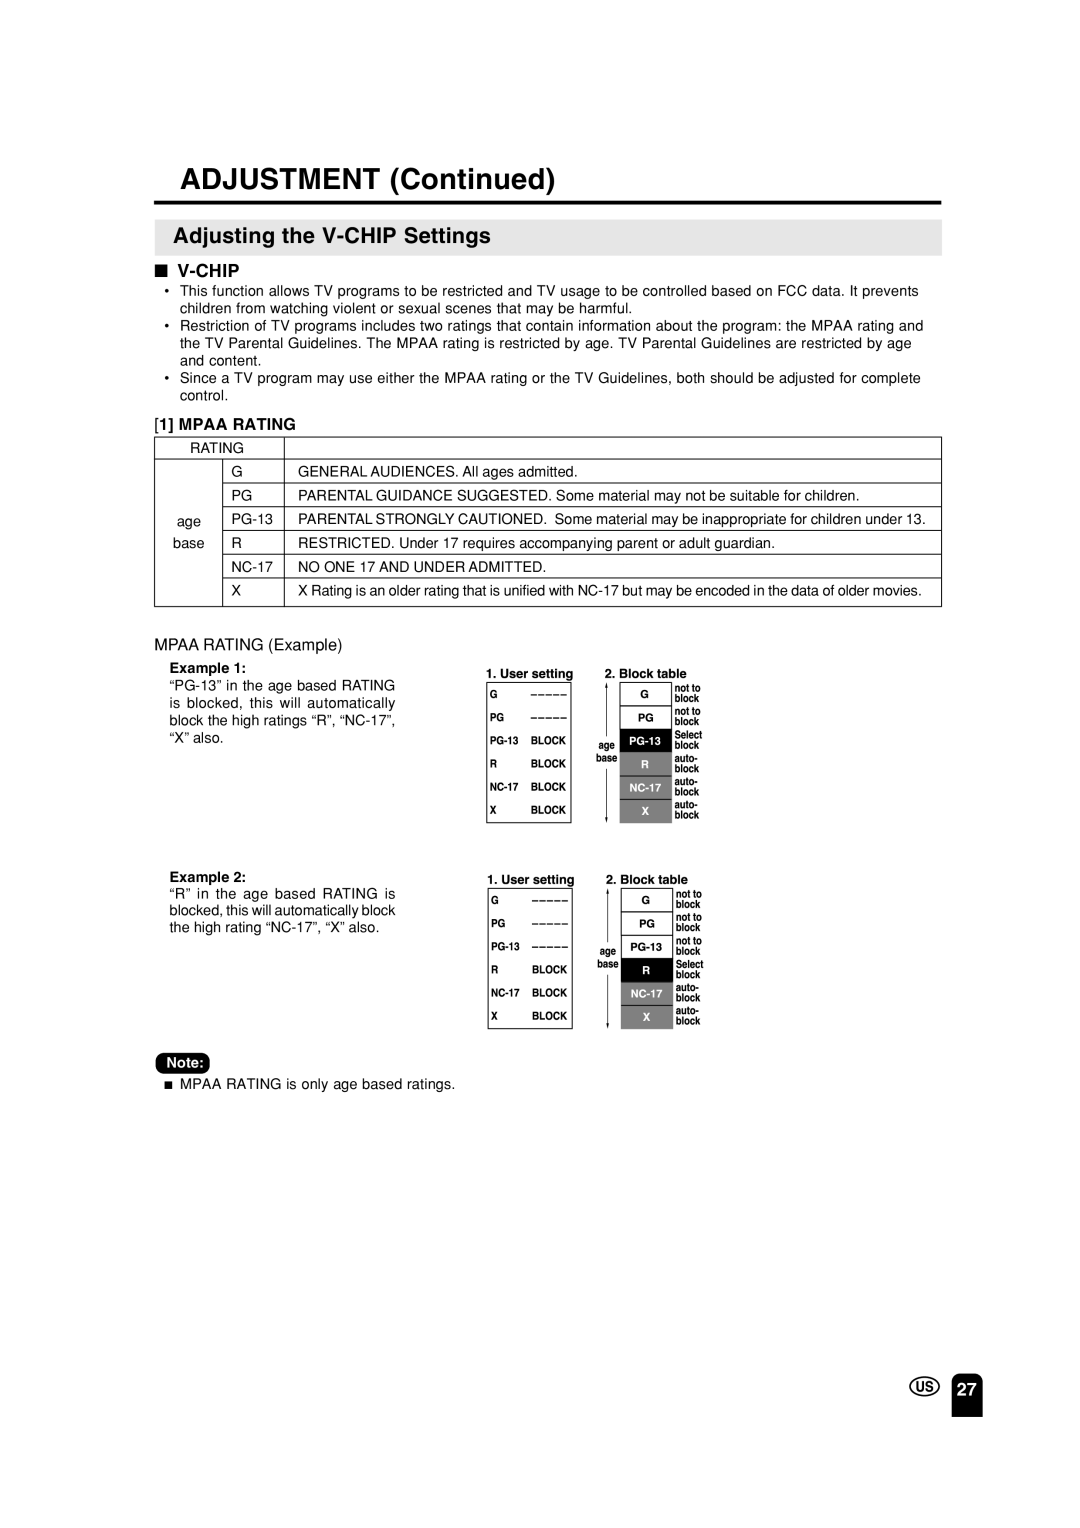 Sharp LC 15A2U operation manual Adjusting the V-CHIP Settings, ADJUSTMENT Continued, V-Chip, Mpaa Rating, Example 